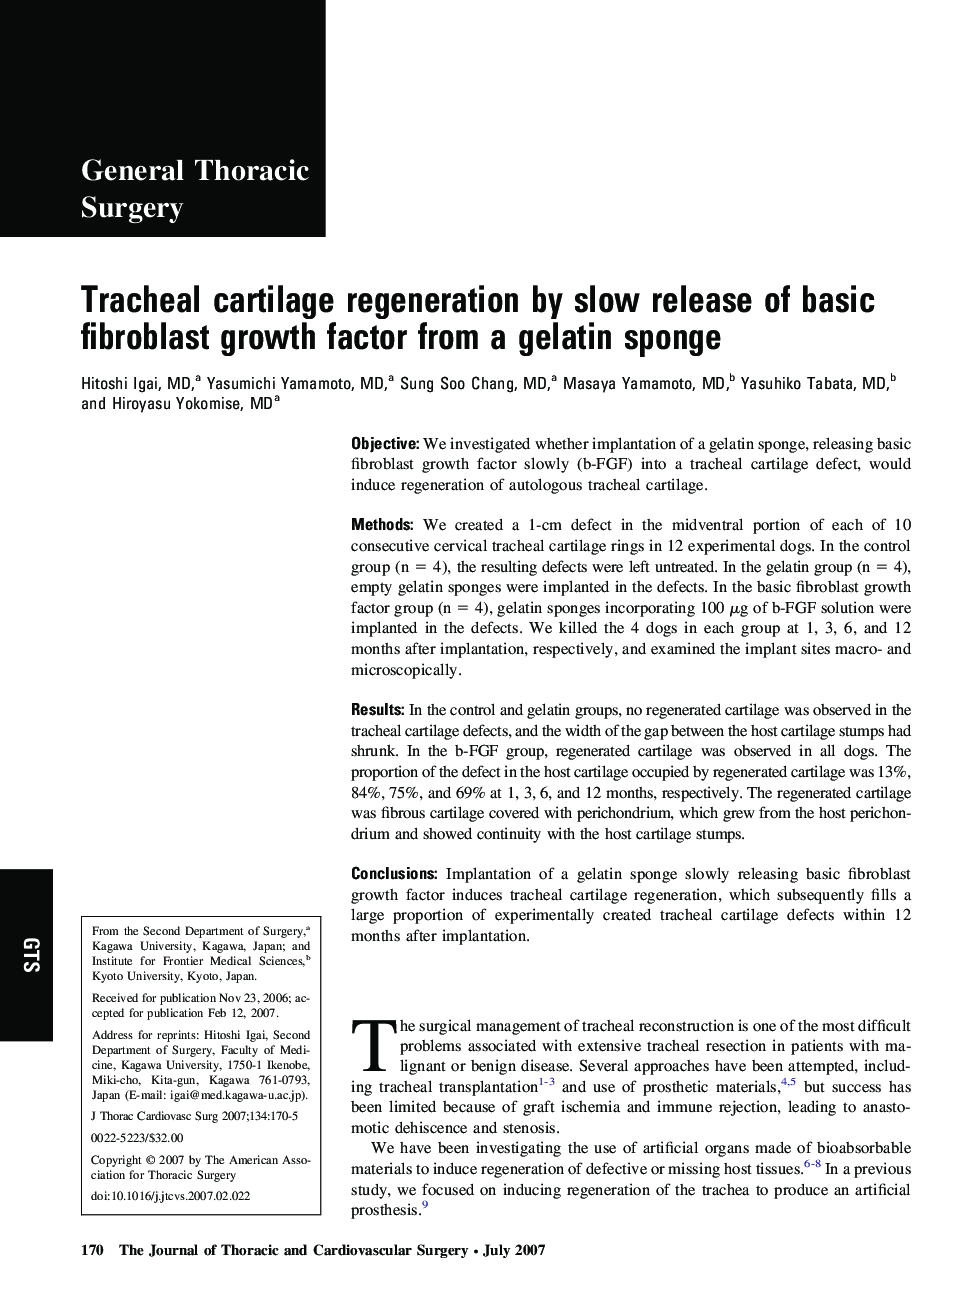 Tracheal cartilage regeneration by slow release of basic fibroblast growth factor from a gelatin sponge